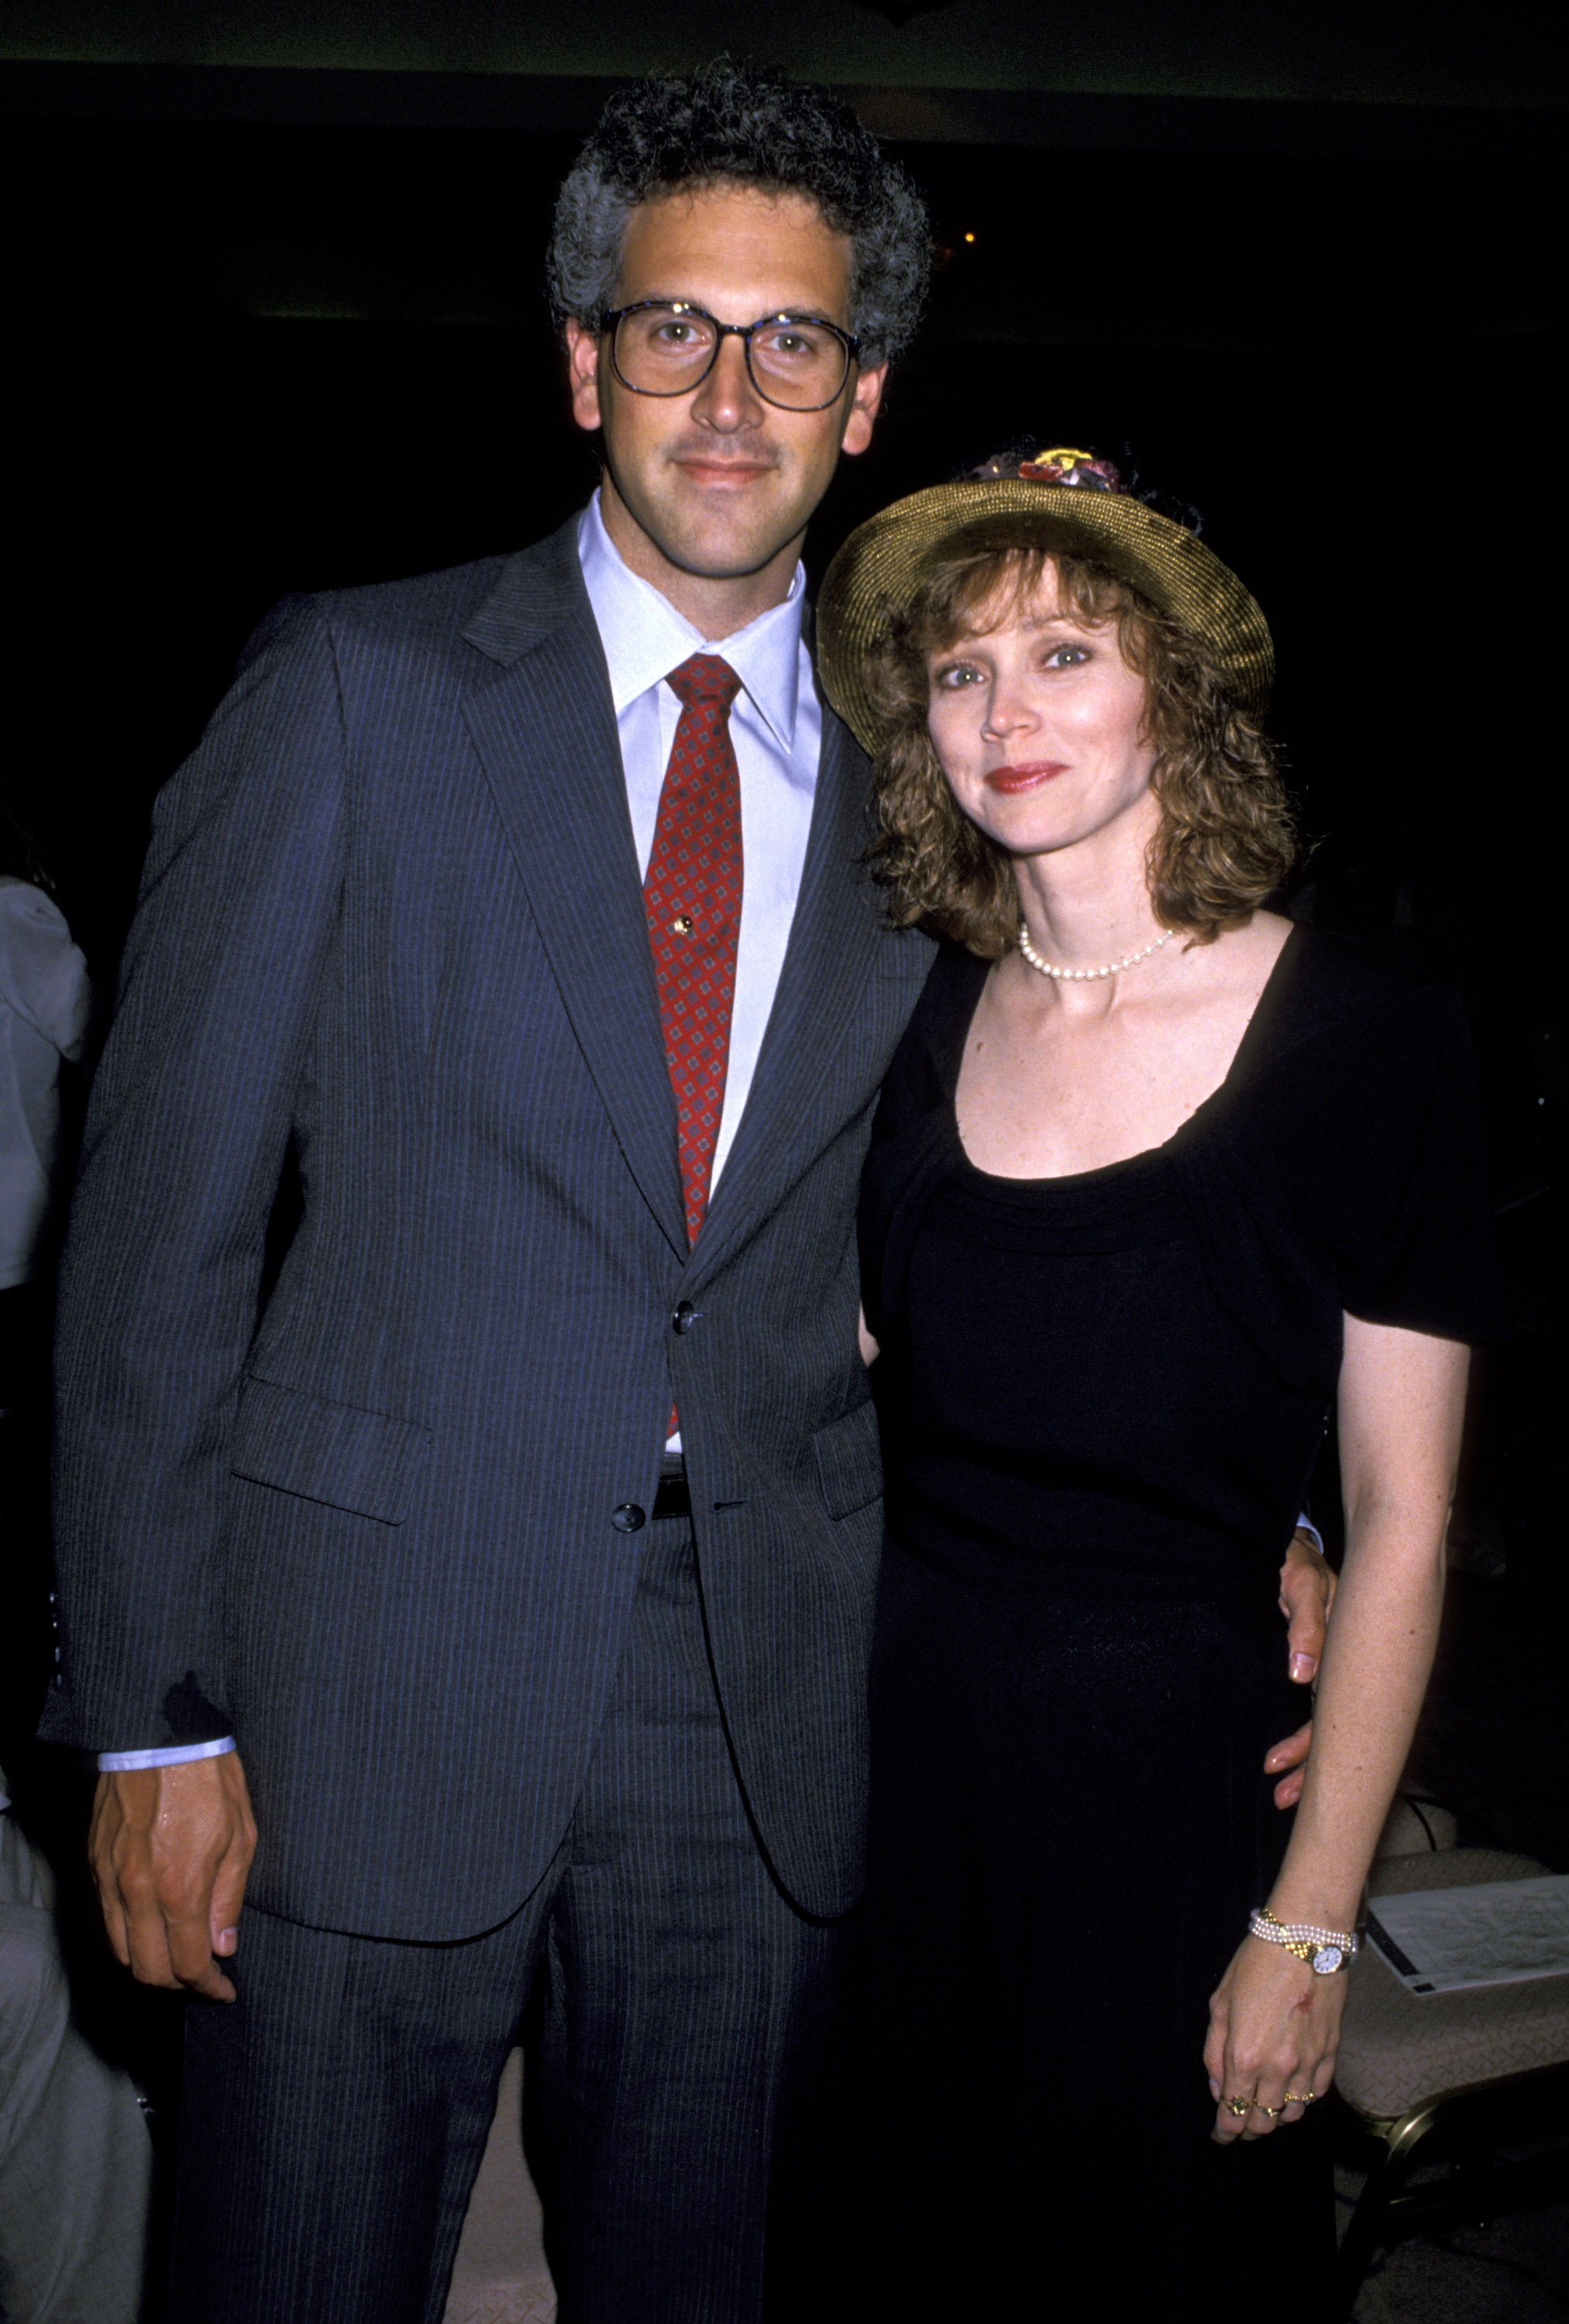 Bruce Tyson and Shelley Long during Homeless Art Auction Benefit at Loew's Santa Monica Beach Hotel in Santa Monica, California, United States. | Source: Getty Images